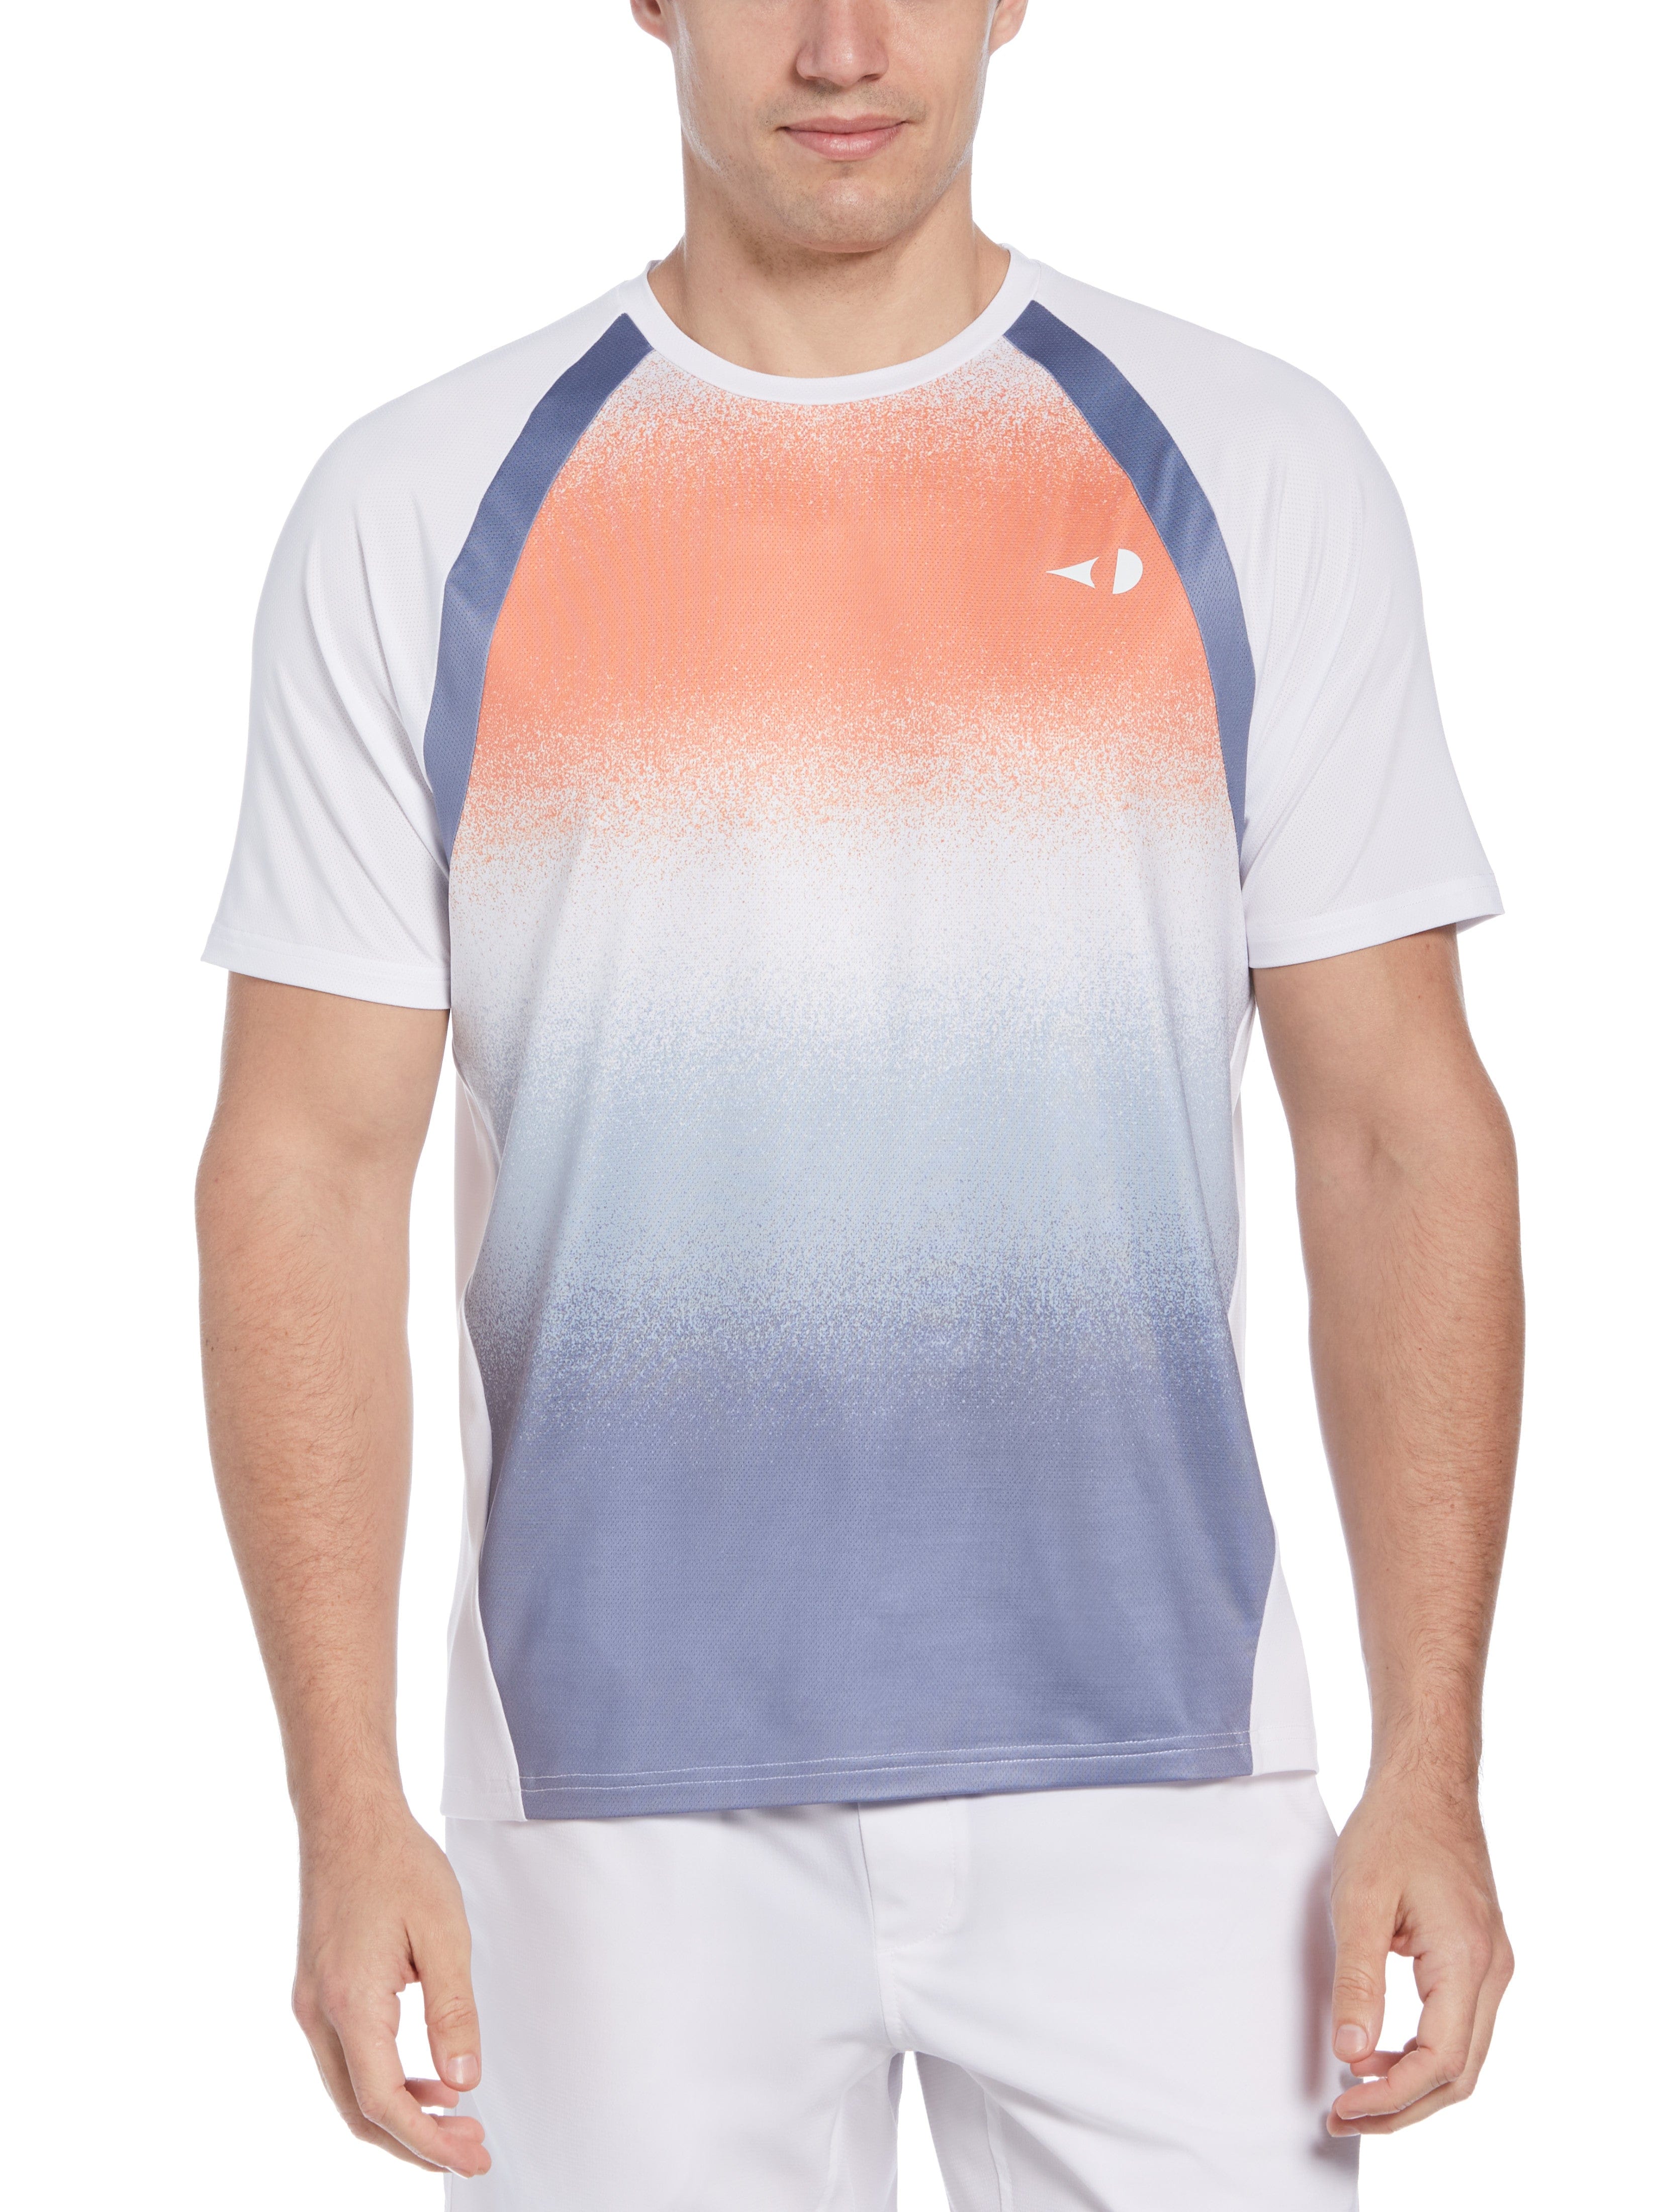 Grand Slam Mens Spray Gradient Printed Tennis T-Shirt, Size Large, Bright Wh/Candied Yams White, Polyester/Spandex | Golf Apparel Shop